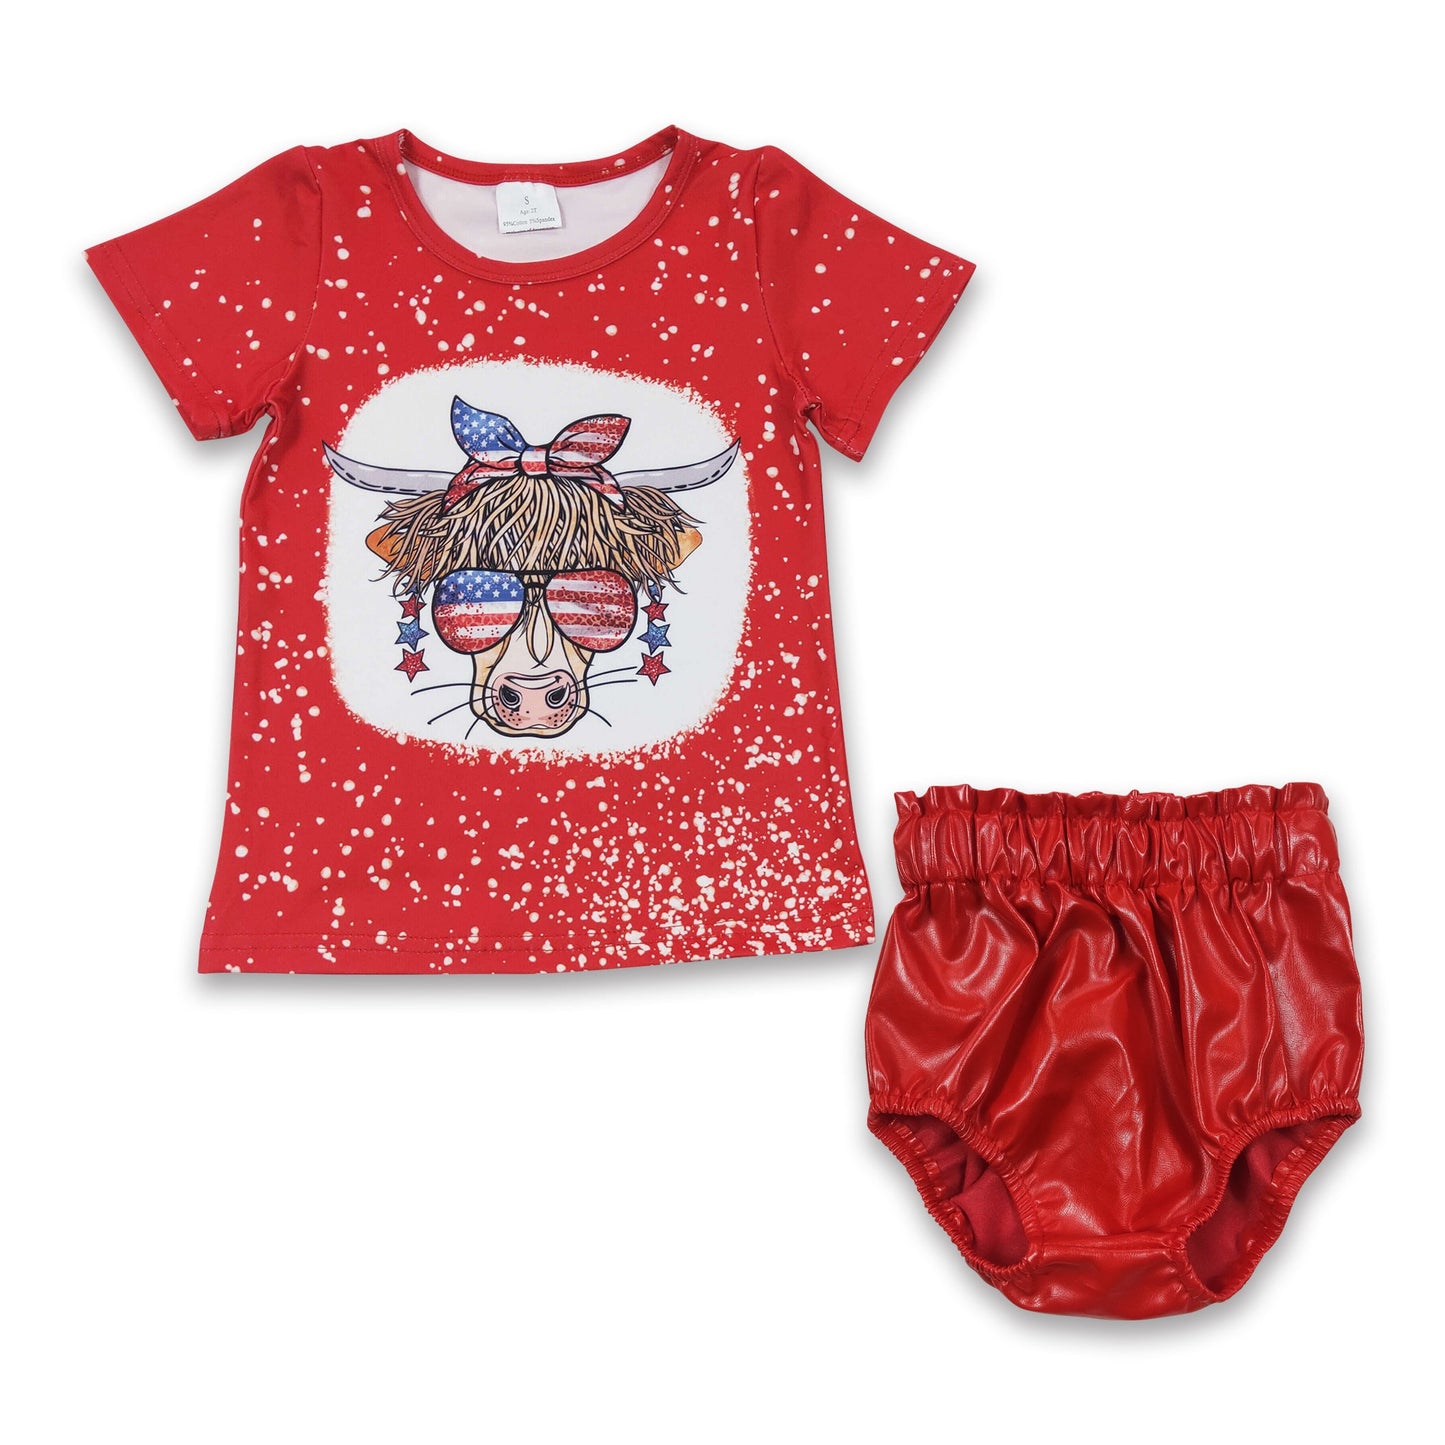 Highland cow glasses shirt bummies baby 4th of july set